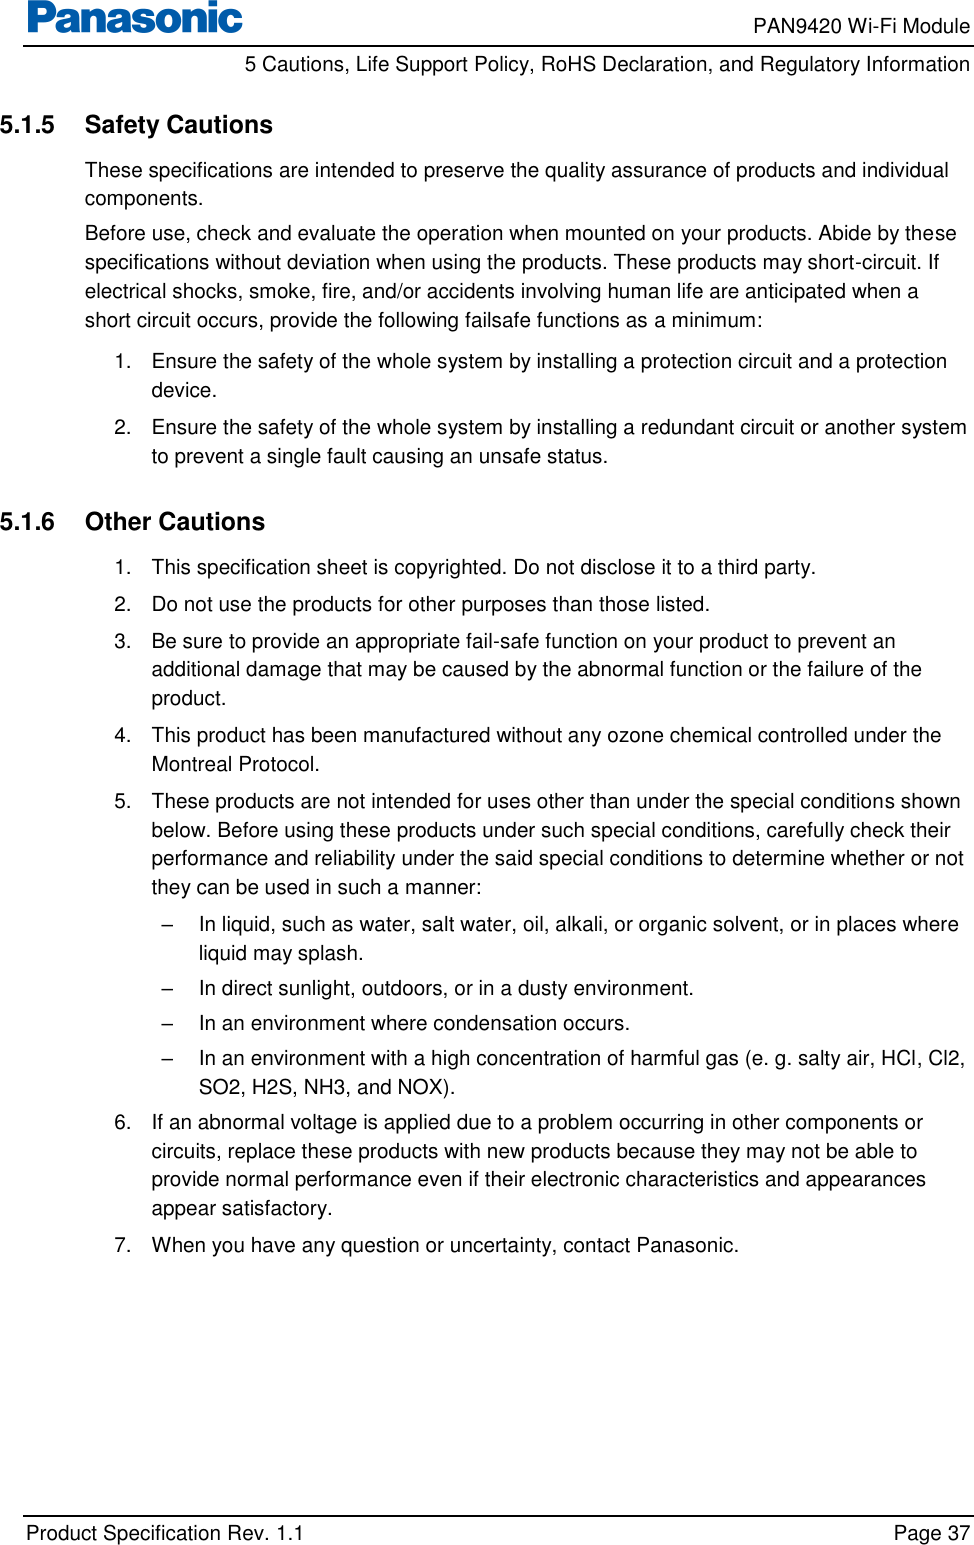     PAN9420 Wi-Fi Module         5 Cautions, Life Support Policy, RoHS Declaration, and Regulatory Information    Product Specification Rev. 1.1    Page 37  5.1.5  Safety Cautions These specifications are intended to preserve the quality assurance of products and individual components. Before use, check and evaluate the operation when mounted on your products. Abide by these specifications without deviation when using the products. These products may short-circuit. If electrical shocks, smoke, fire, and/or accidents involving human life are anticipated when a short circuit occurs, provide the following failsafe functions as a minimum: 1.  Ensure the safety of the whole system by installing a protection circuit and a protection device. 2.  Ensure the safety of the whole system by installing a redundant circuit or another system to prevent a single fault causing an unsafe status.  5.1.6  Other Cautions 1.  This specification sheet is copyrighted. Do not disclose it to a third party. 2.  Do not use the products for other purposes than those listed. 3.  Be sure to provide an appropriate fail-safe function on your product to prevent an additional damage that may be caused by the abnormal function or the failure of the product. 4.  This product has been manufactured without any ozone chemical controlled under the Montreal Protocol. 5.  These products are not intended for uses other than under the special conditions shown below. Before using these products under such special conditions, carefully check their performance and reliability under the said special conditions to determine whether or not they can be used in such a manner: –  In liquid, such as water, salt water, oil, alkali, or organic solvent, or in places where liquid may splash. –  In direct sunlight, outdoors, or in a dusty environment. –  In an environment where condensation occurs. –  In an environment with a high concentration of harmful gas (e. g. salty air, HCl, Cl2, SO2, H2S, NH3, and NOX). 6.  If an abnormal voltage is applied due to a problem occurring in other components or circuits, replace these products with new products because they may not be able to provide normal performance even if their electronic characteristics and appearances appear satisfactory. 7.  When you have any question or uncertainty, contact Panasonic.  